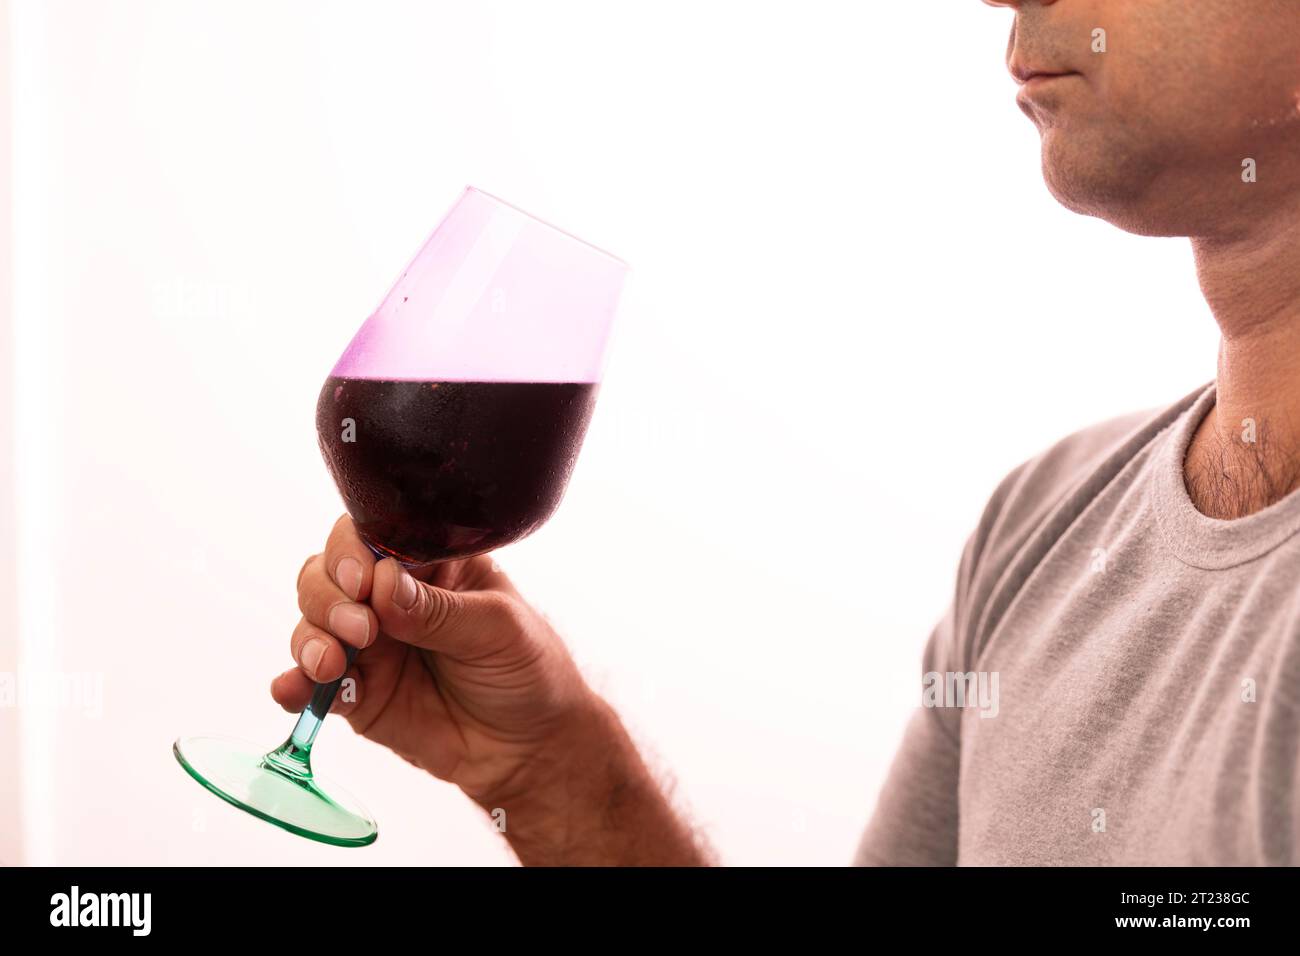 Unrecognizable caucasian man in 40s wearing a gray t shirt holding a wineglass full of red wine. Stock Photo